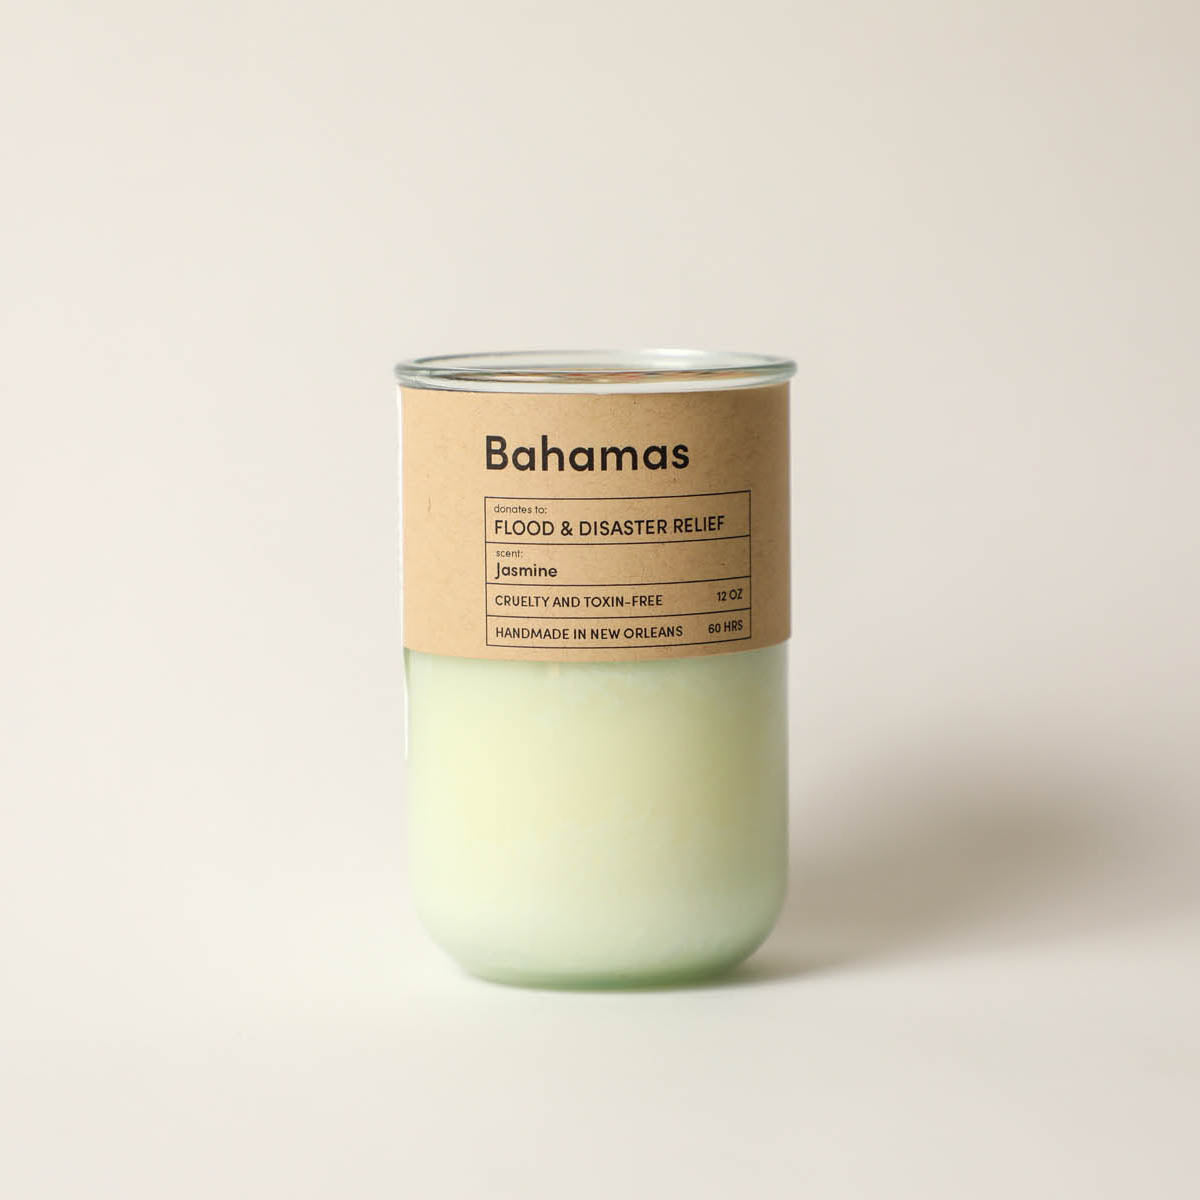 Rebuild, Bahamas Disaster Relief / Jasmine Scent: Candles for Good